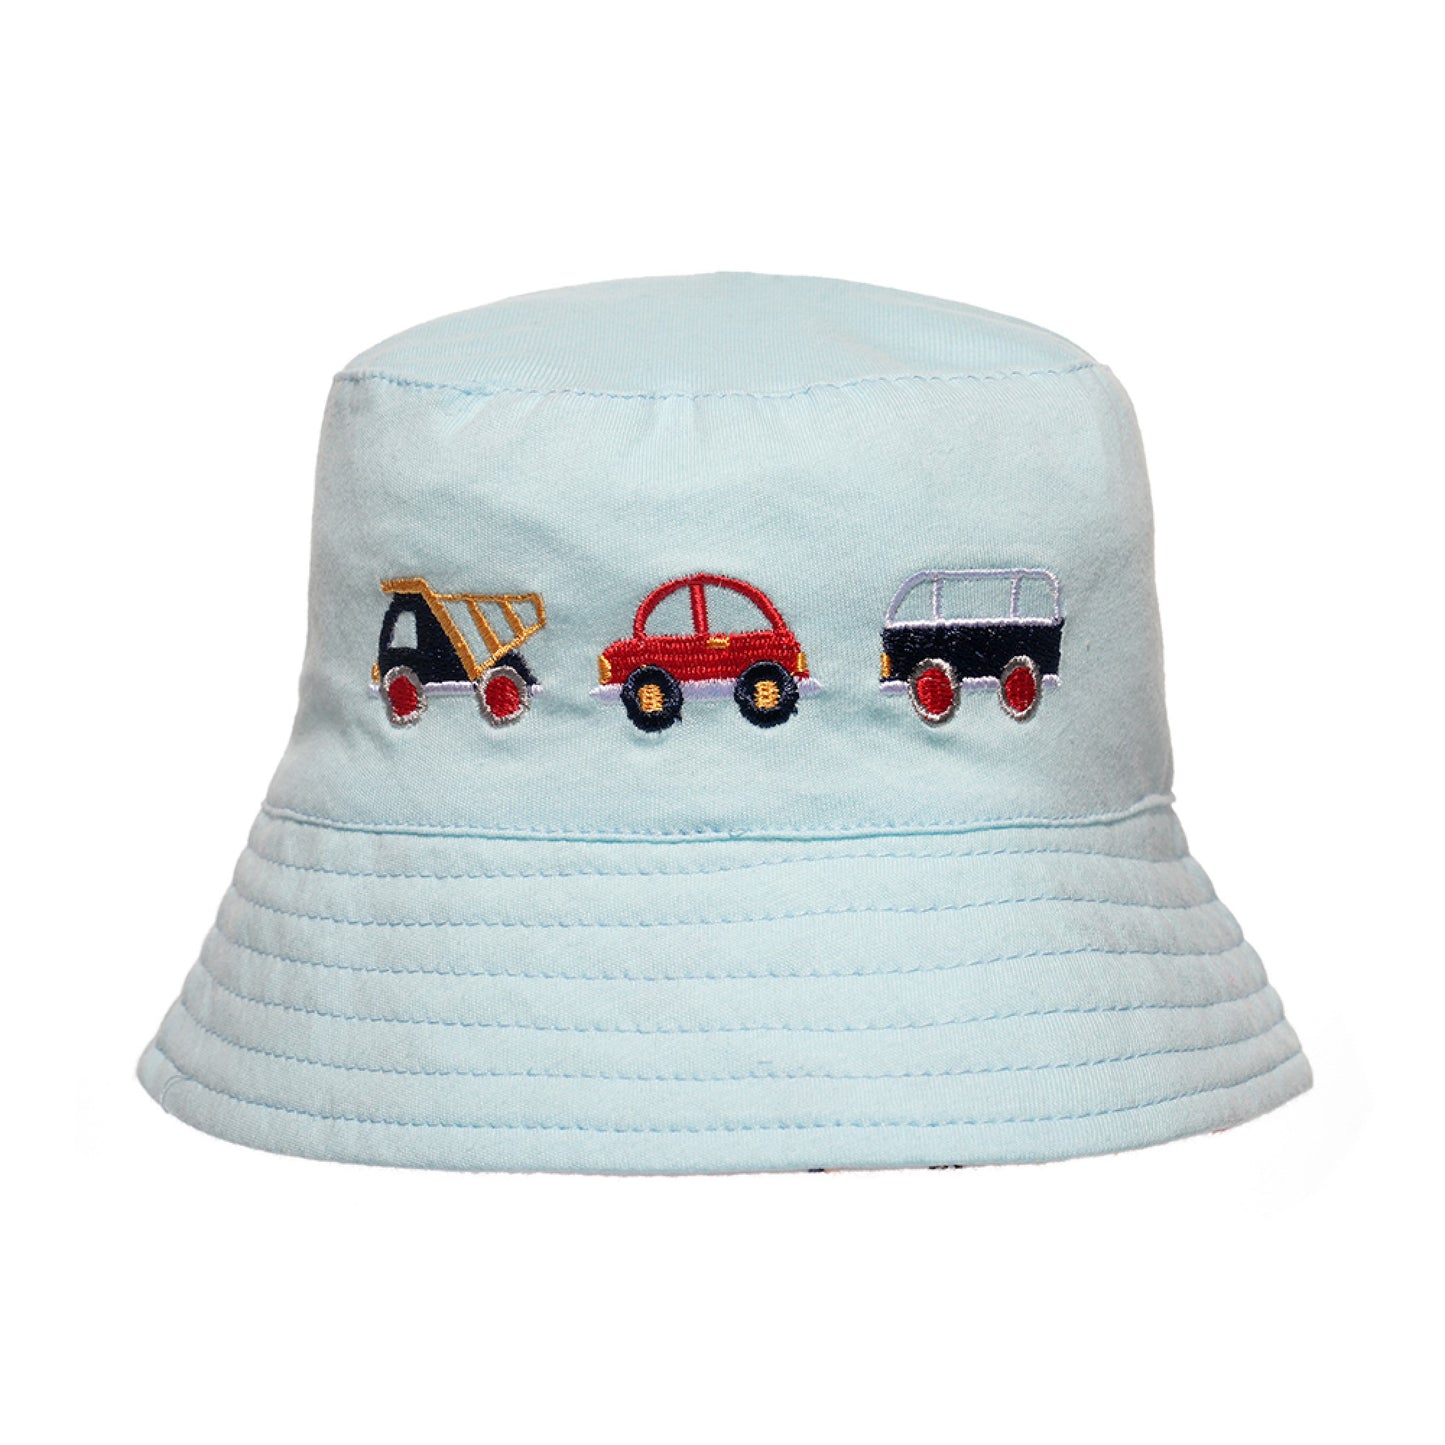 Baby Boys Car Patterned Embroidered Reversible Blue and White Bucket Hat Sun Hat